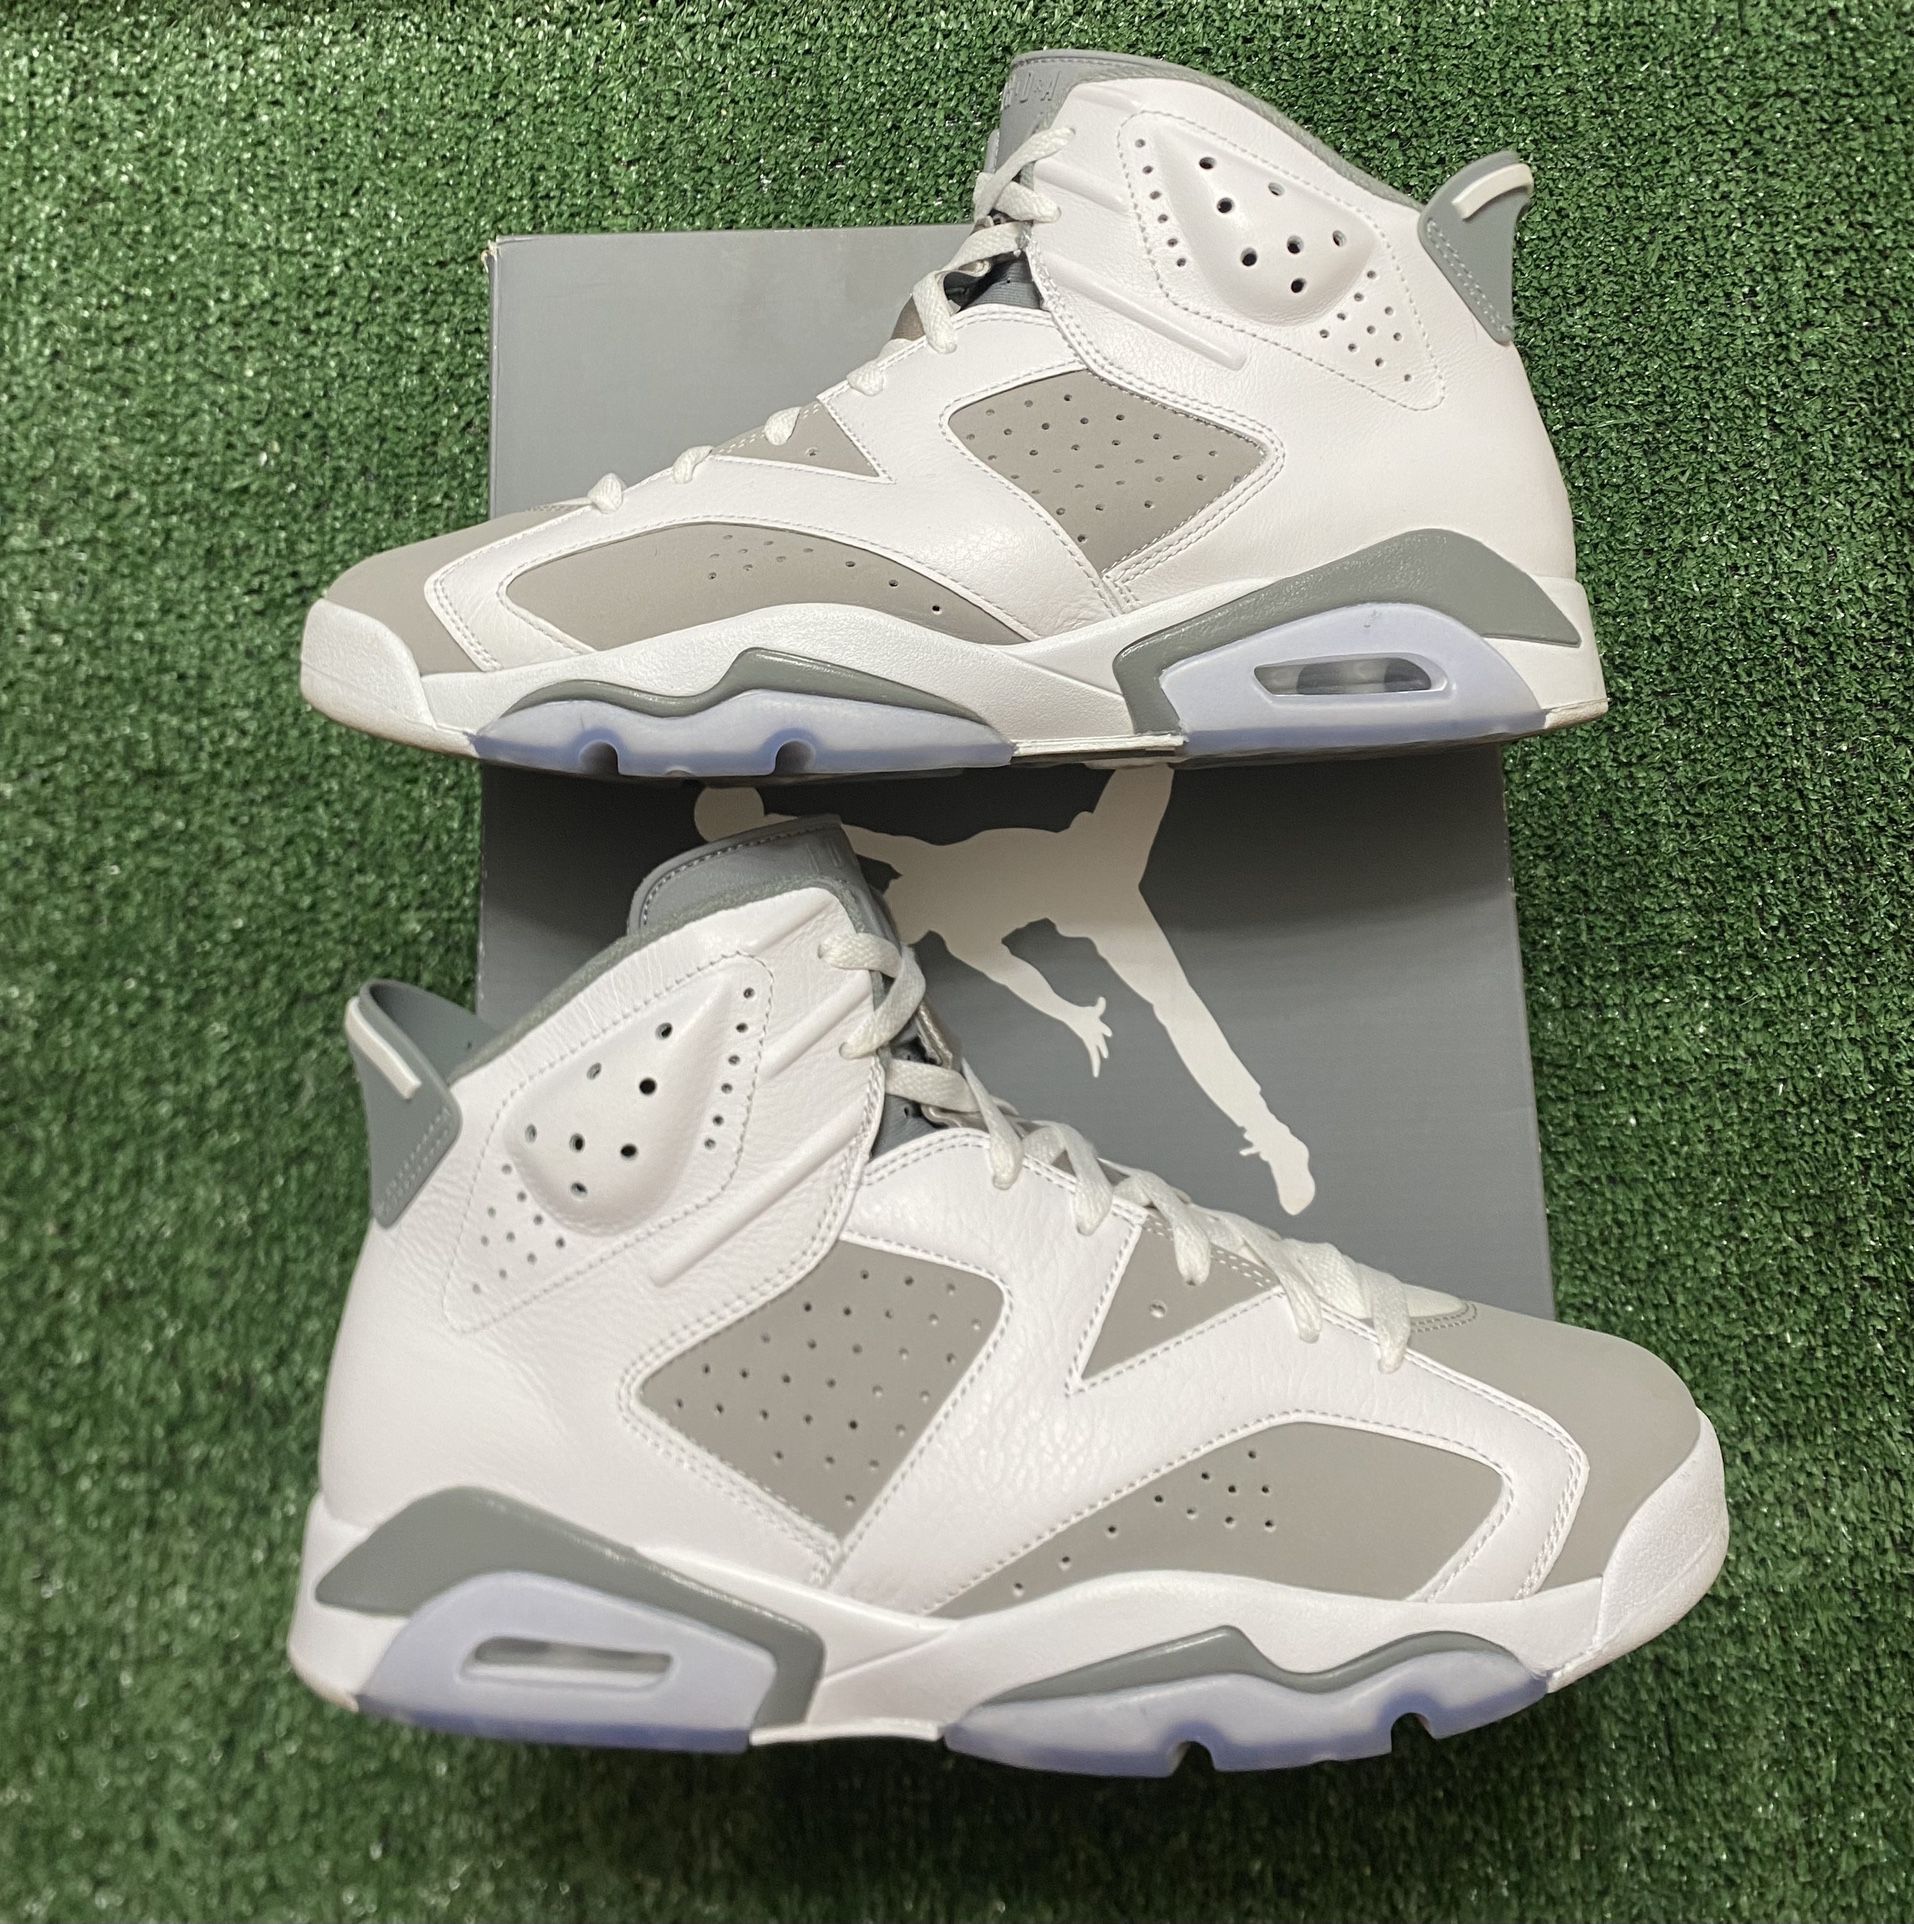 Jordan Cool Grey 6s size 11.5 USED But Clean for Sale in Albuquerque ...